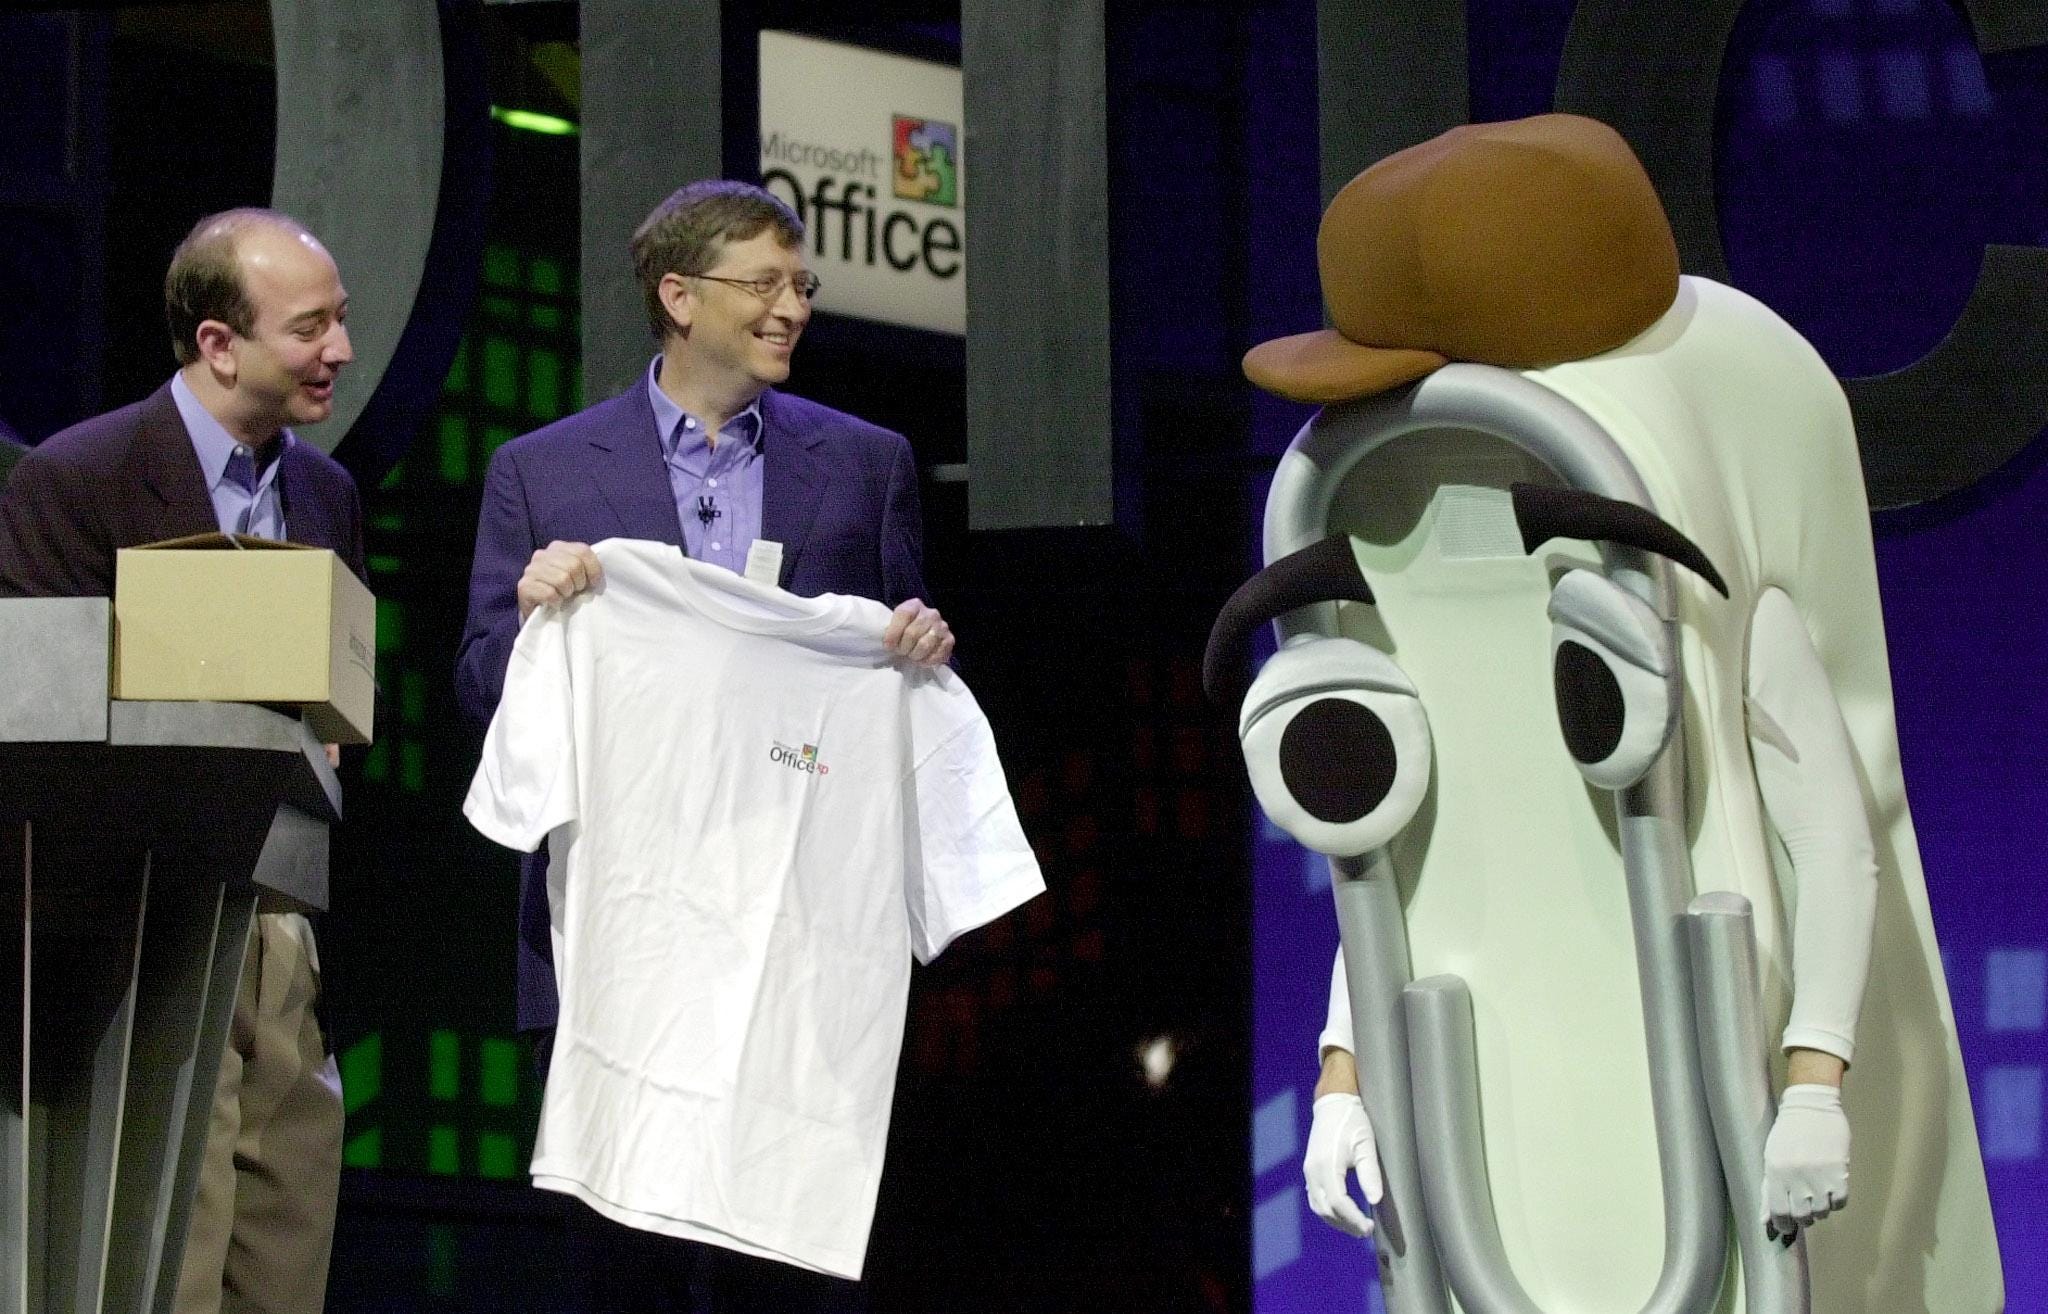 Former Microsoft CEO Bill Gates and former Amazon CEO Jeff Bezos hand a white t-shirt to someone dressed in a cartoon paperclip costume.